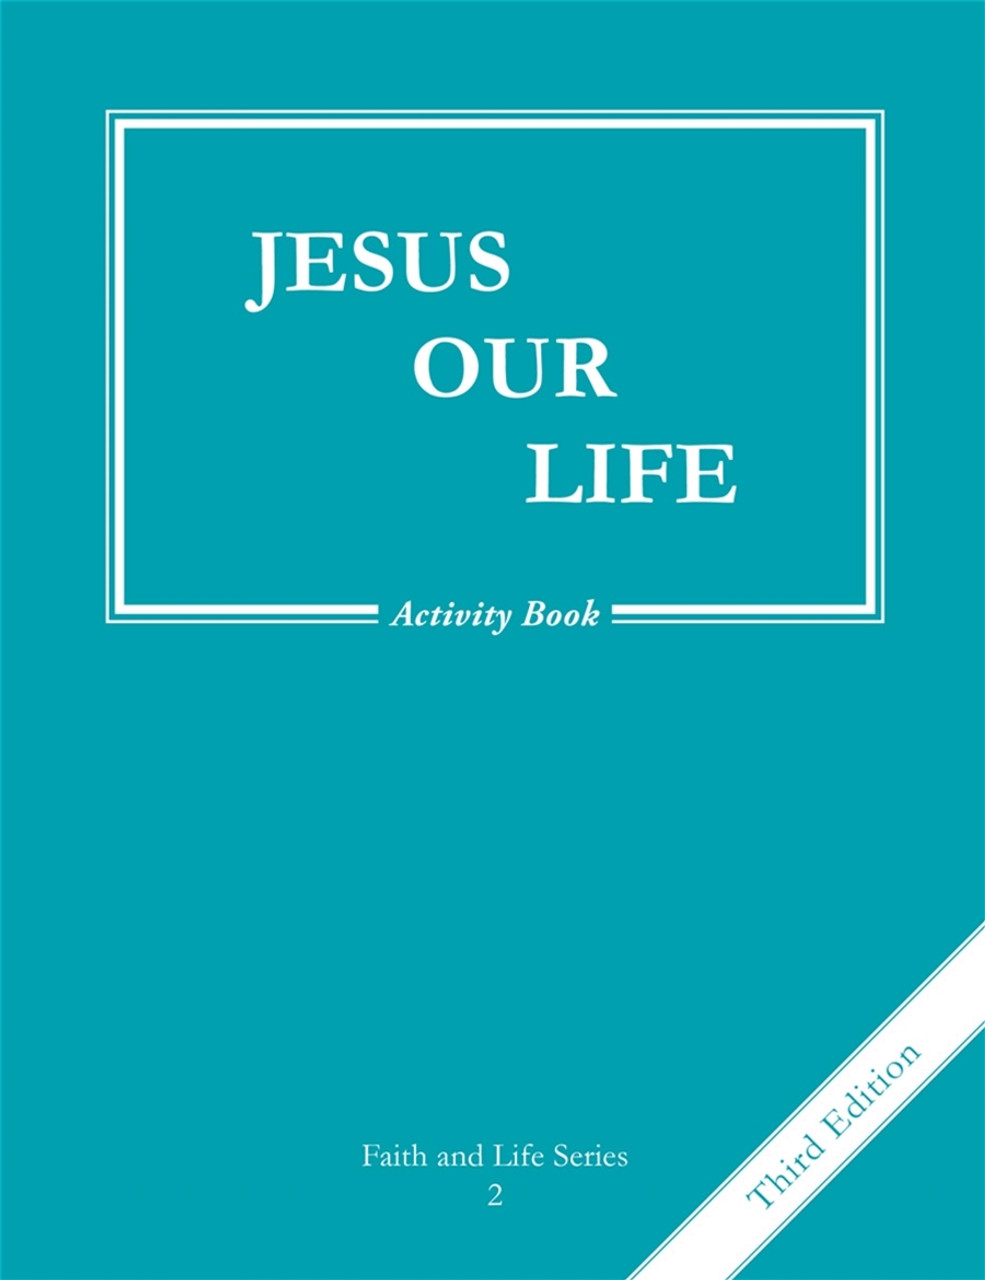 Faith and Life Grade 2: Jesus Our Life Activity Book